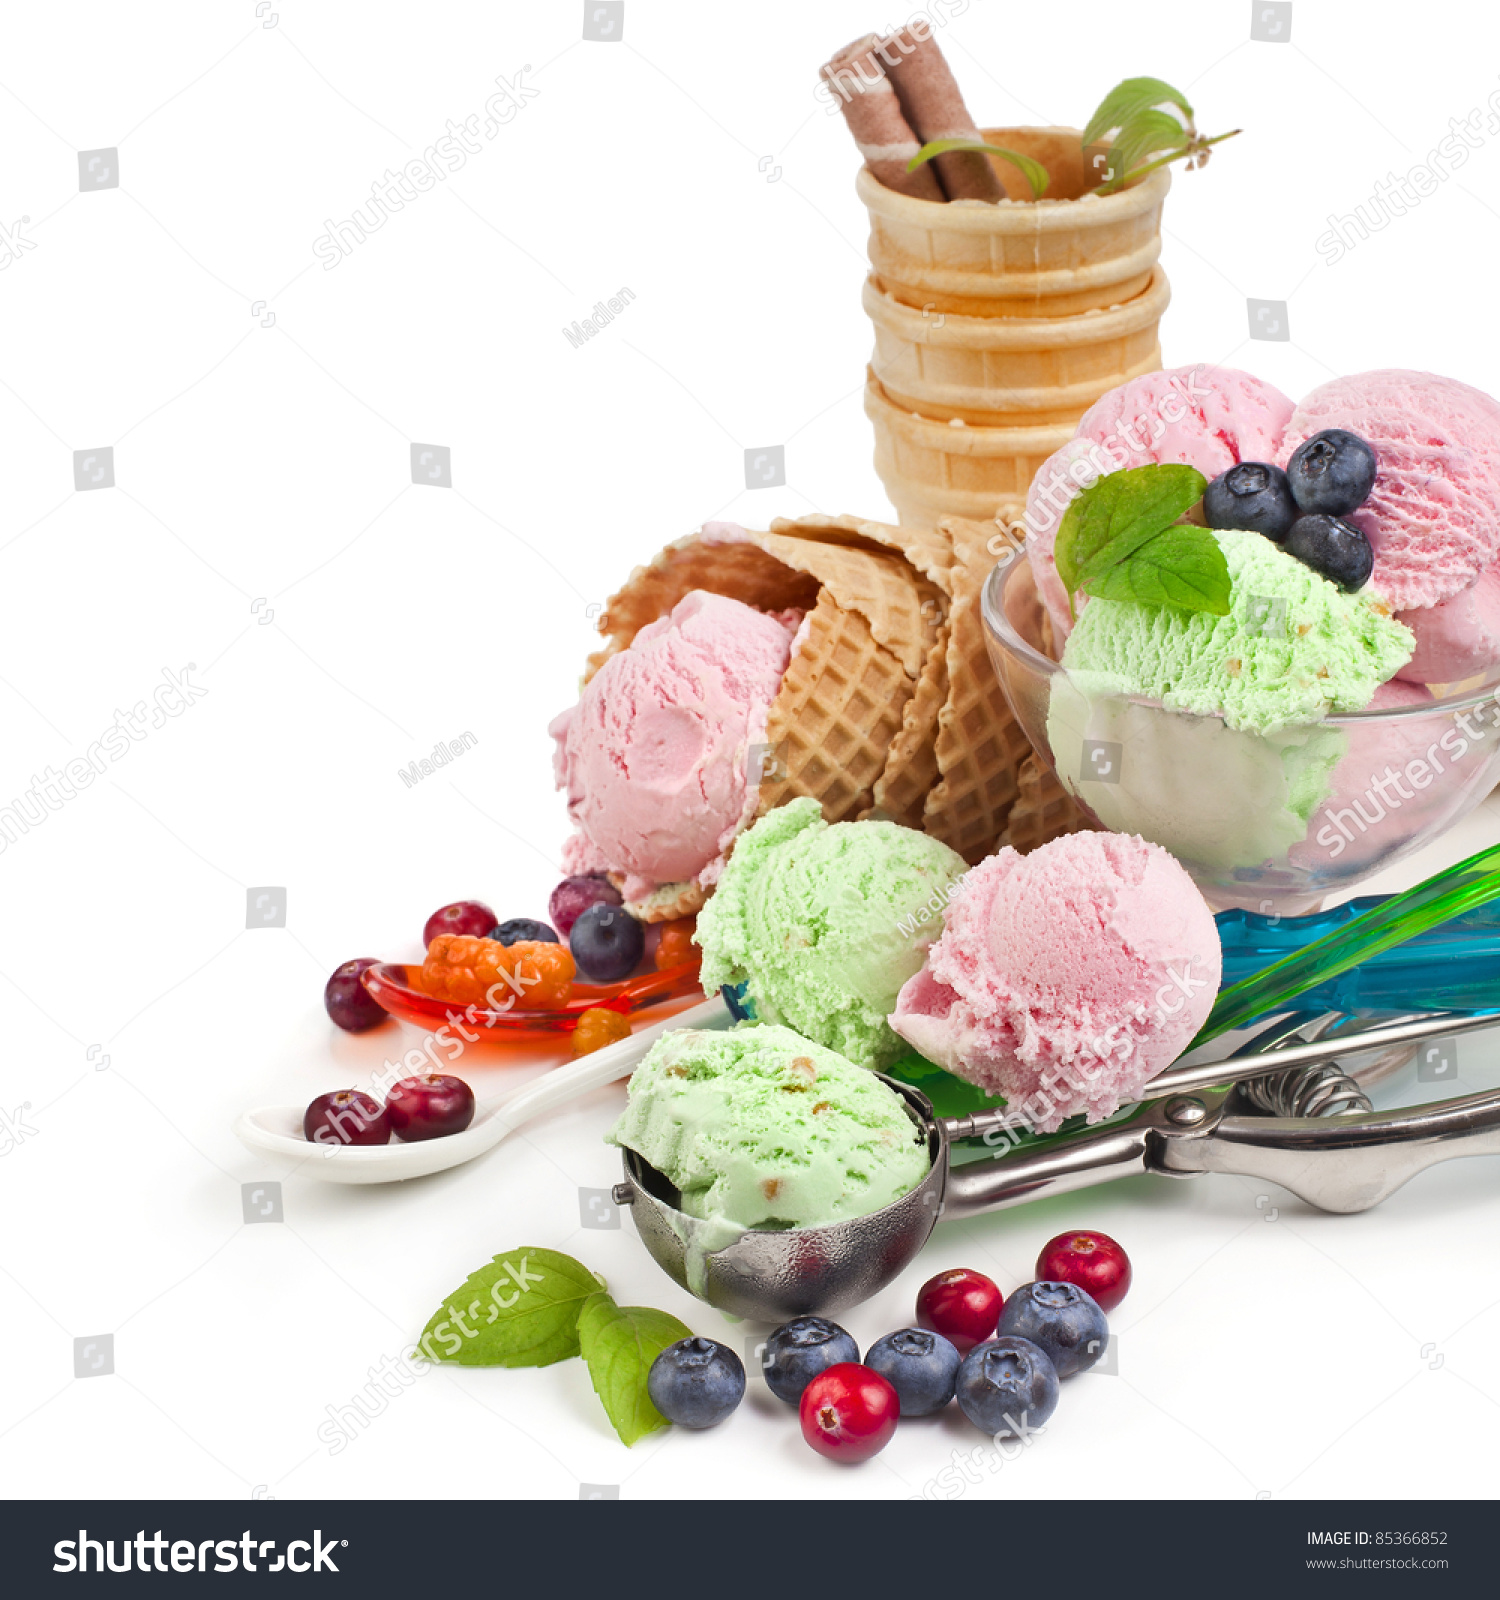 ice cream with fresh berries isolated on white background #85366852